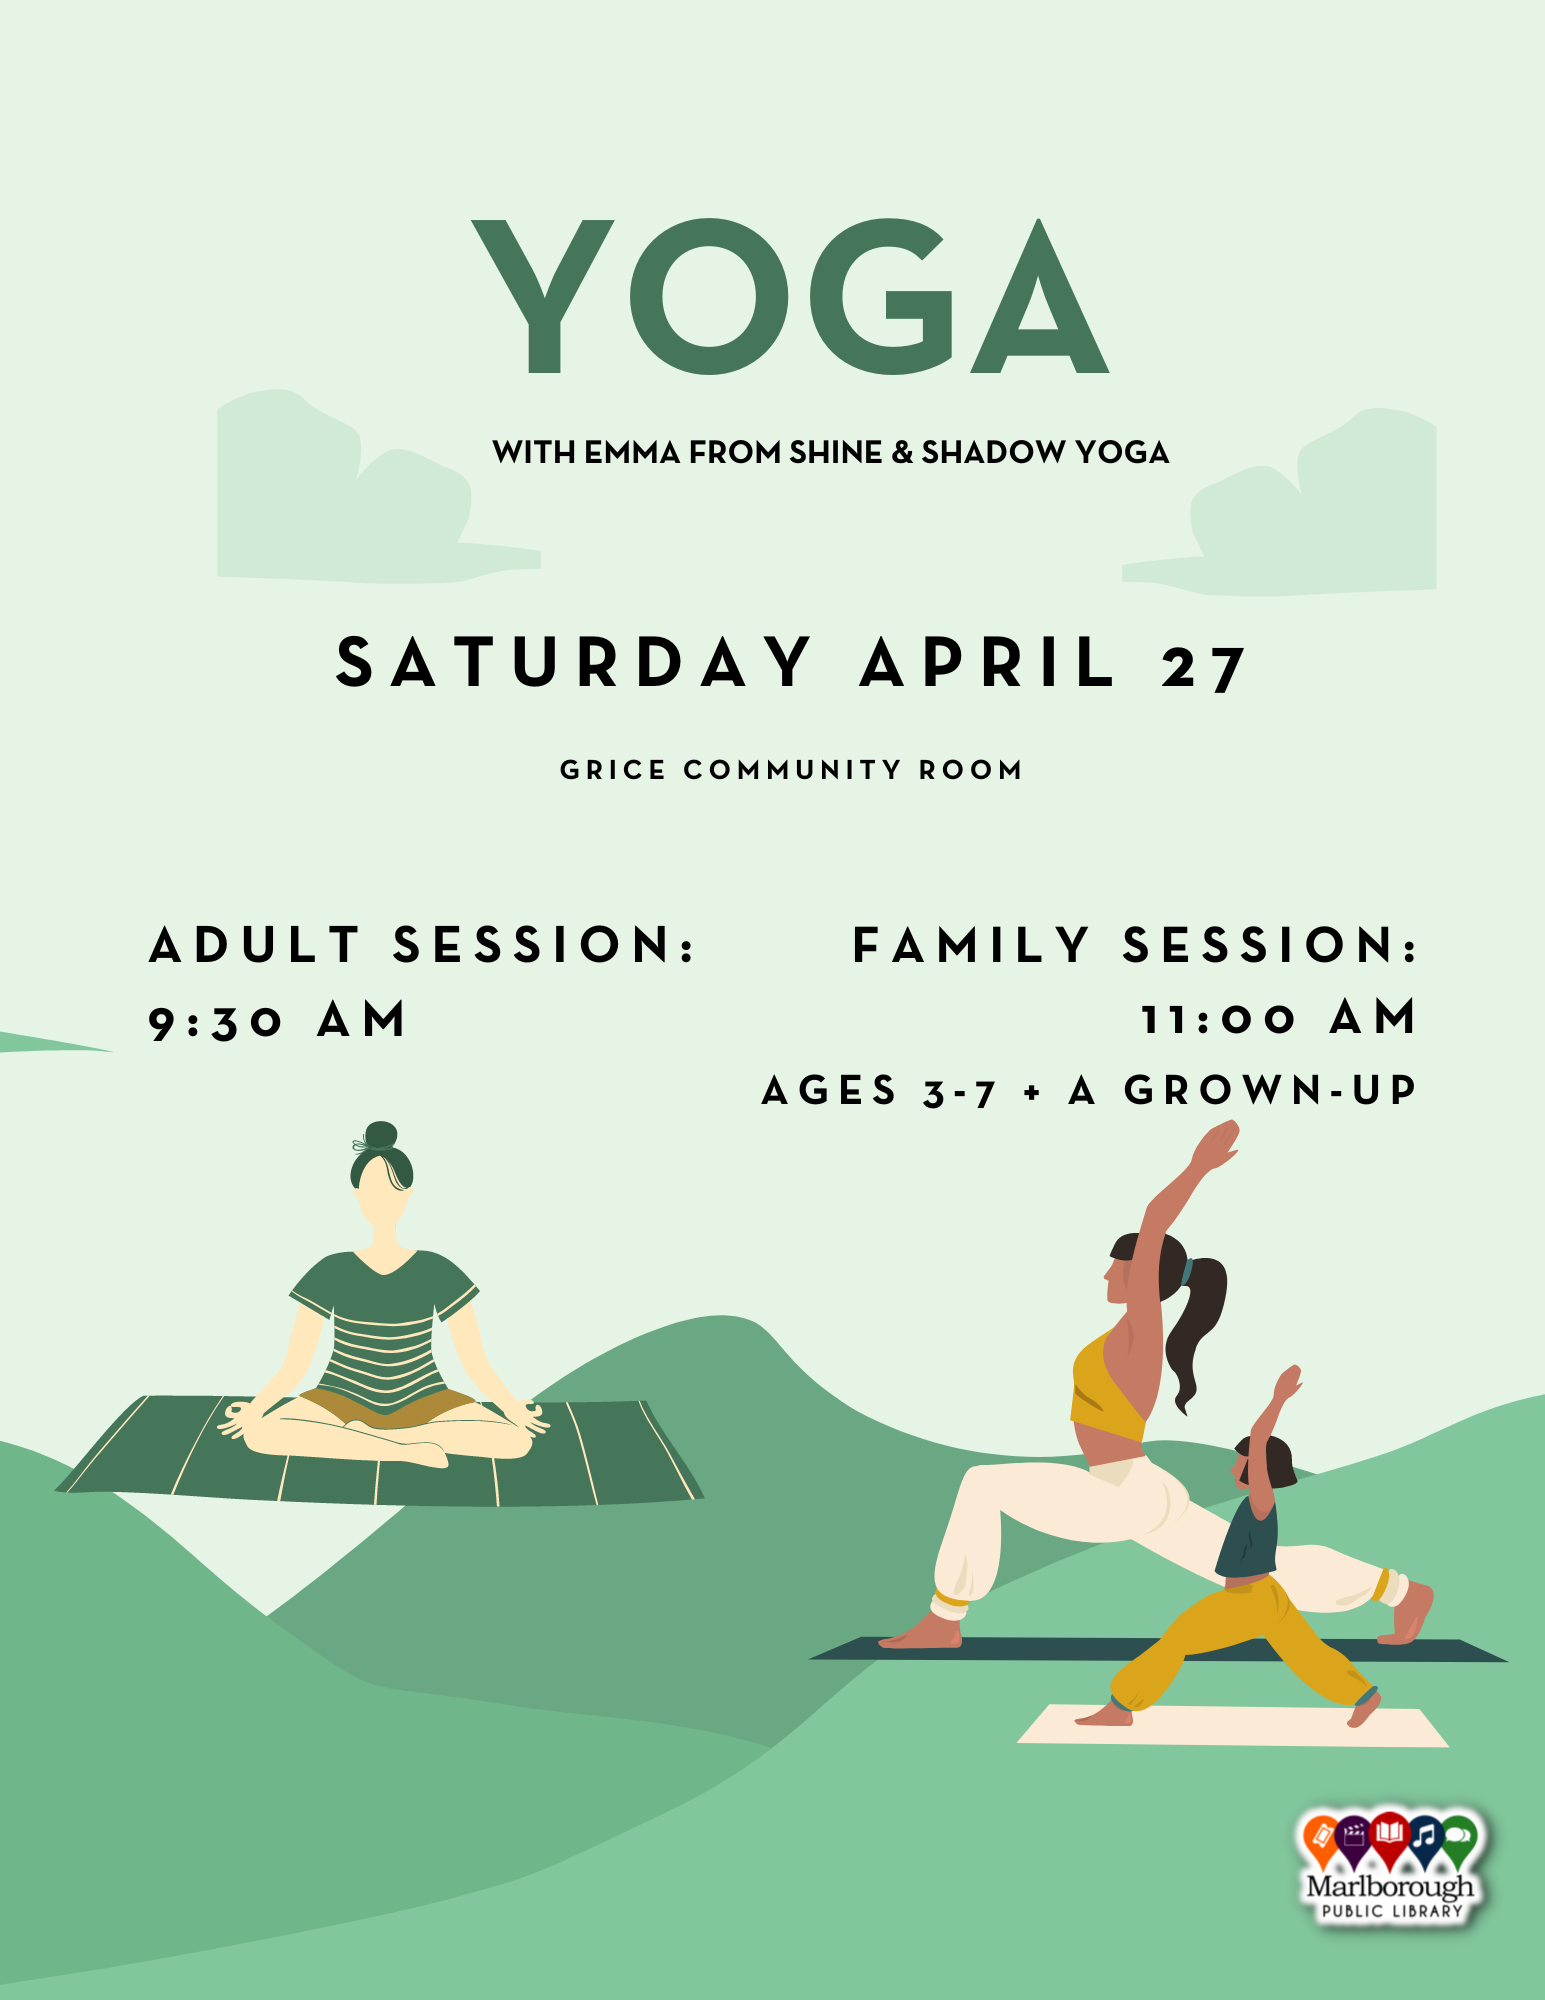 Yoga class at the Marlborough Public Library will happen on Saturday April 27 at 9:30 AM, in the Grice Community Room. Presented by Emma Bartolini of Shine and Shadow Yoga.